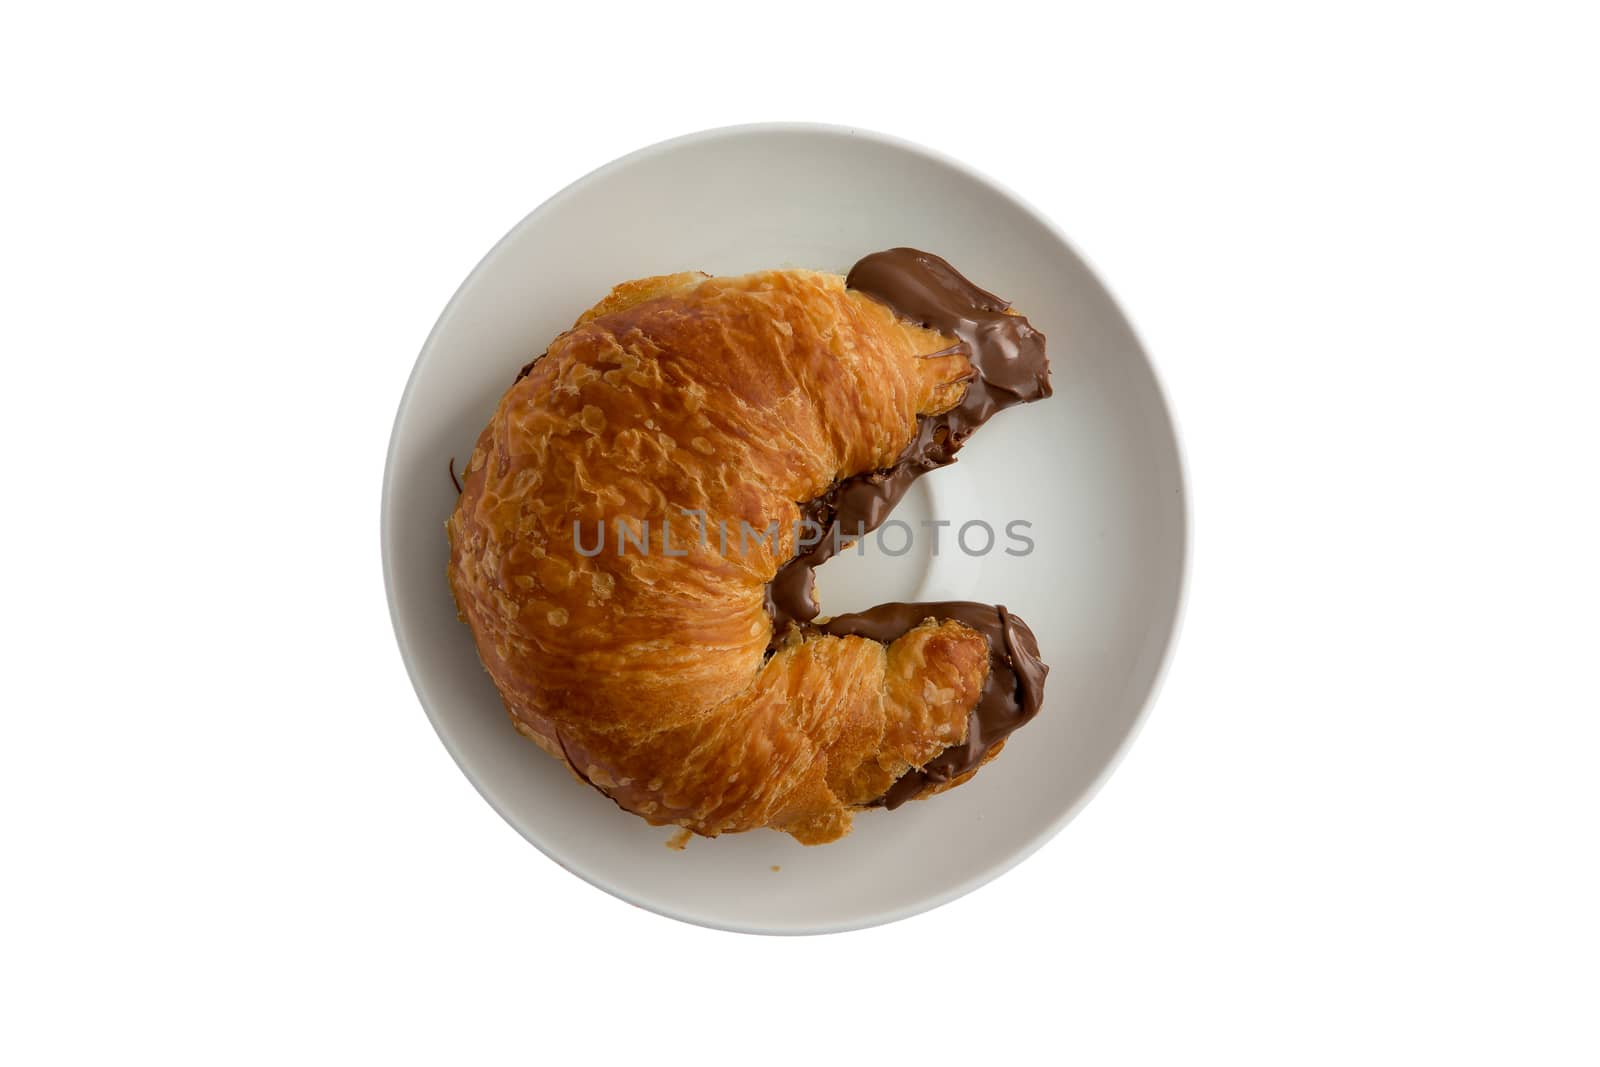 Freshly baked flaky buttery croissant filled to overflowing with hazelnut chocolate spread oozing onto the plate, tempting breakfast viewed from overhead isolated on white